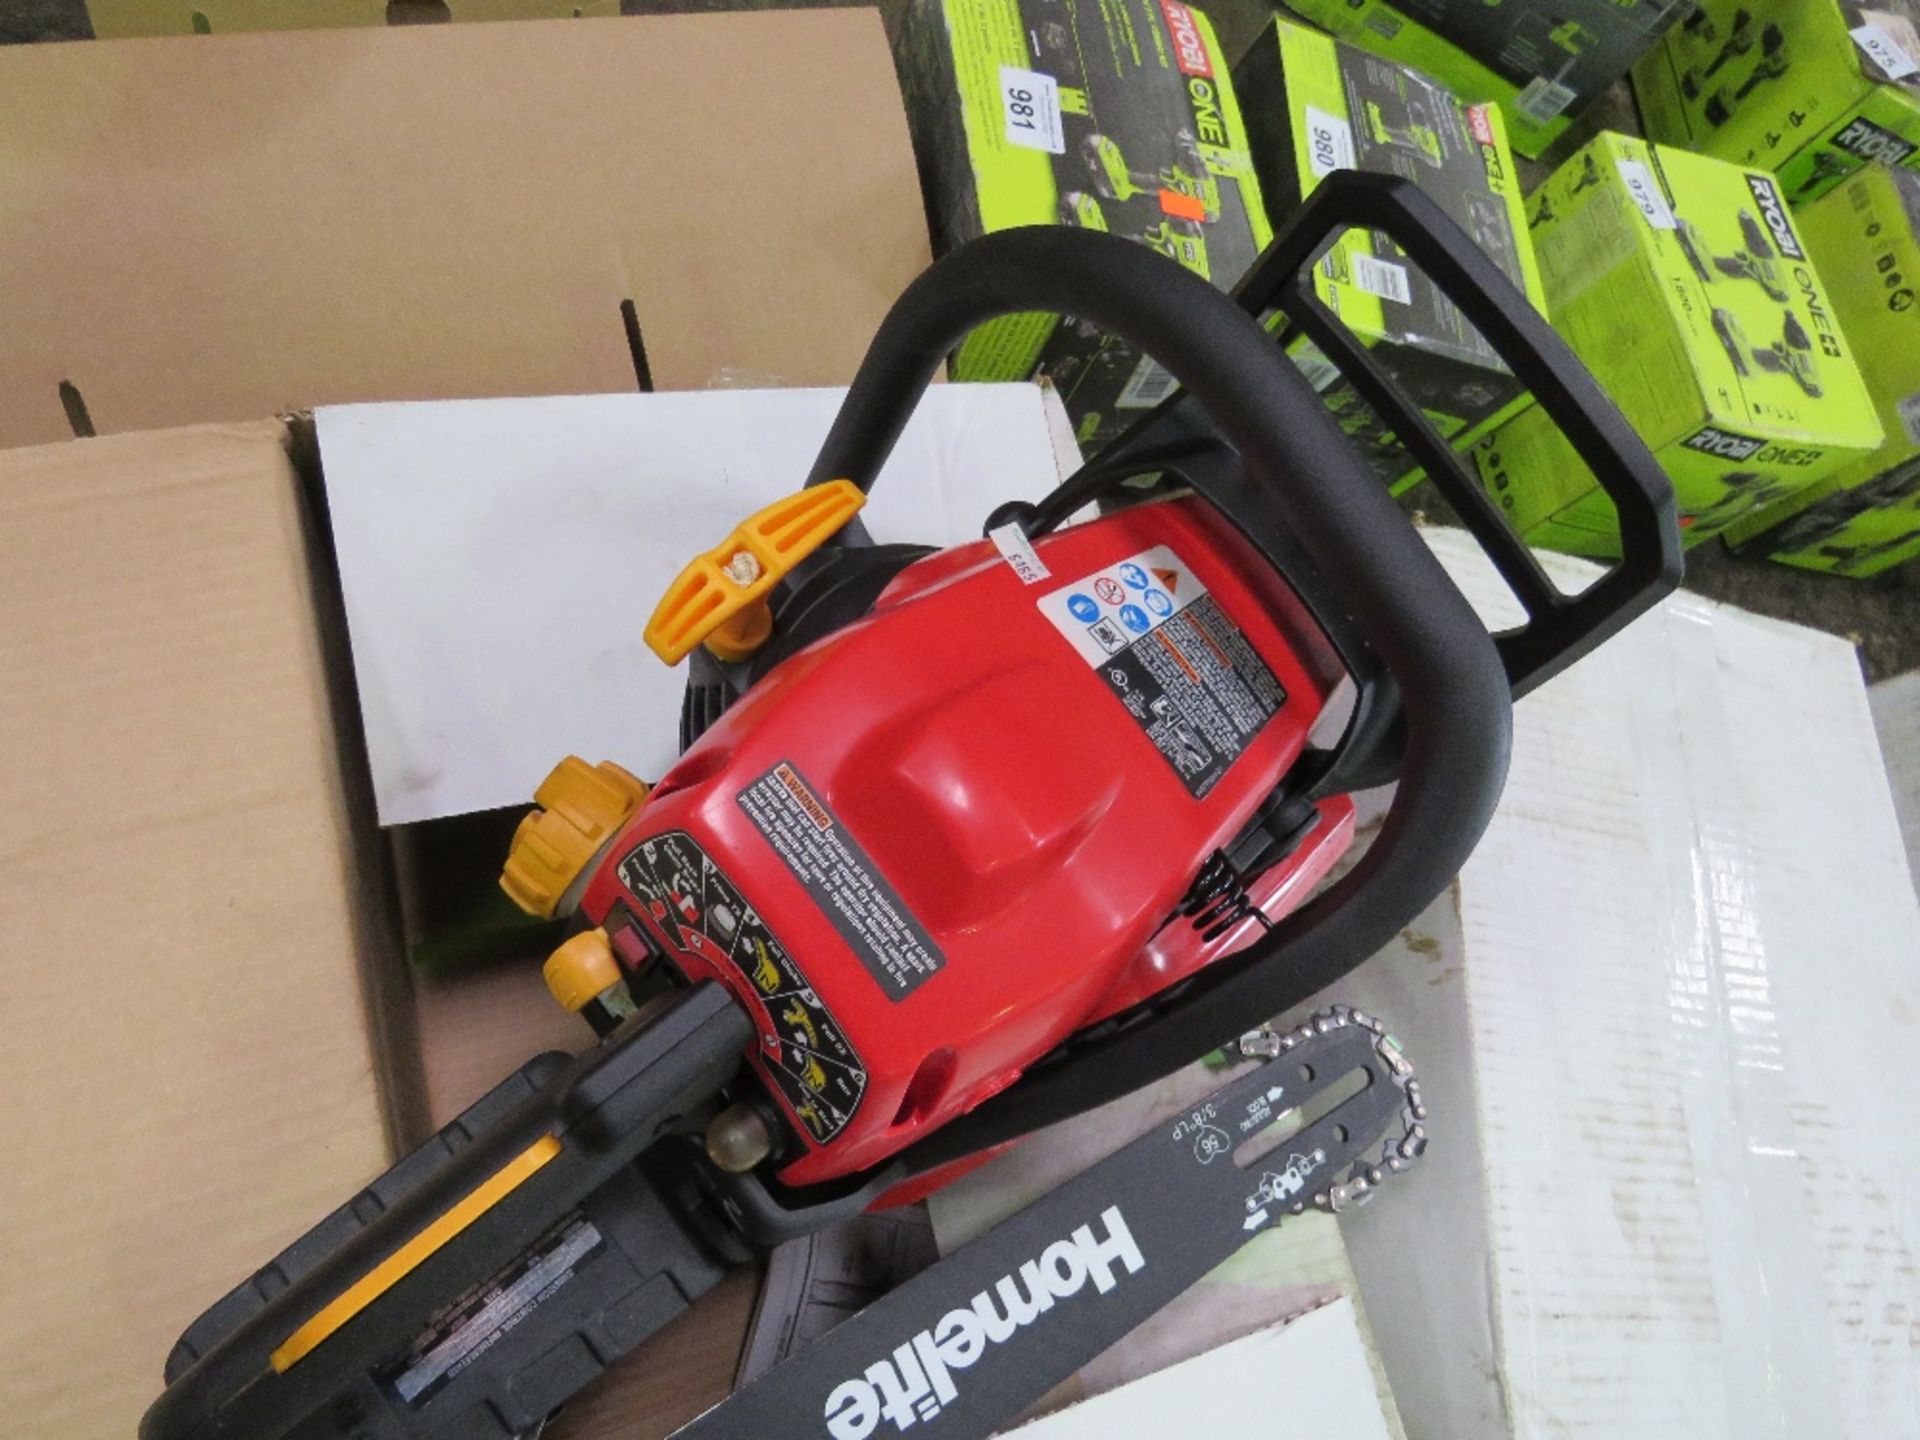 HOMELITE 42CC PETROL ENGINED CHAINSAW WITH 16" BAR, BOXED. - Image 3 of 3